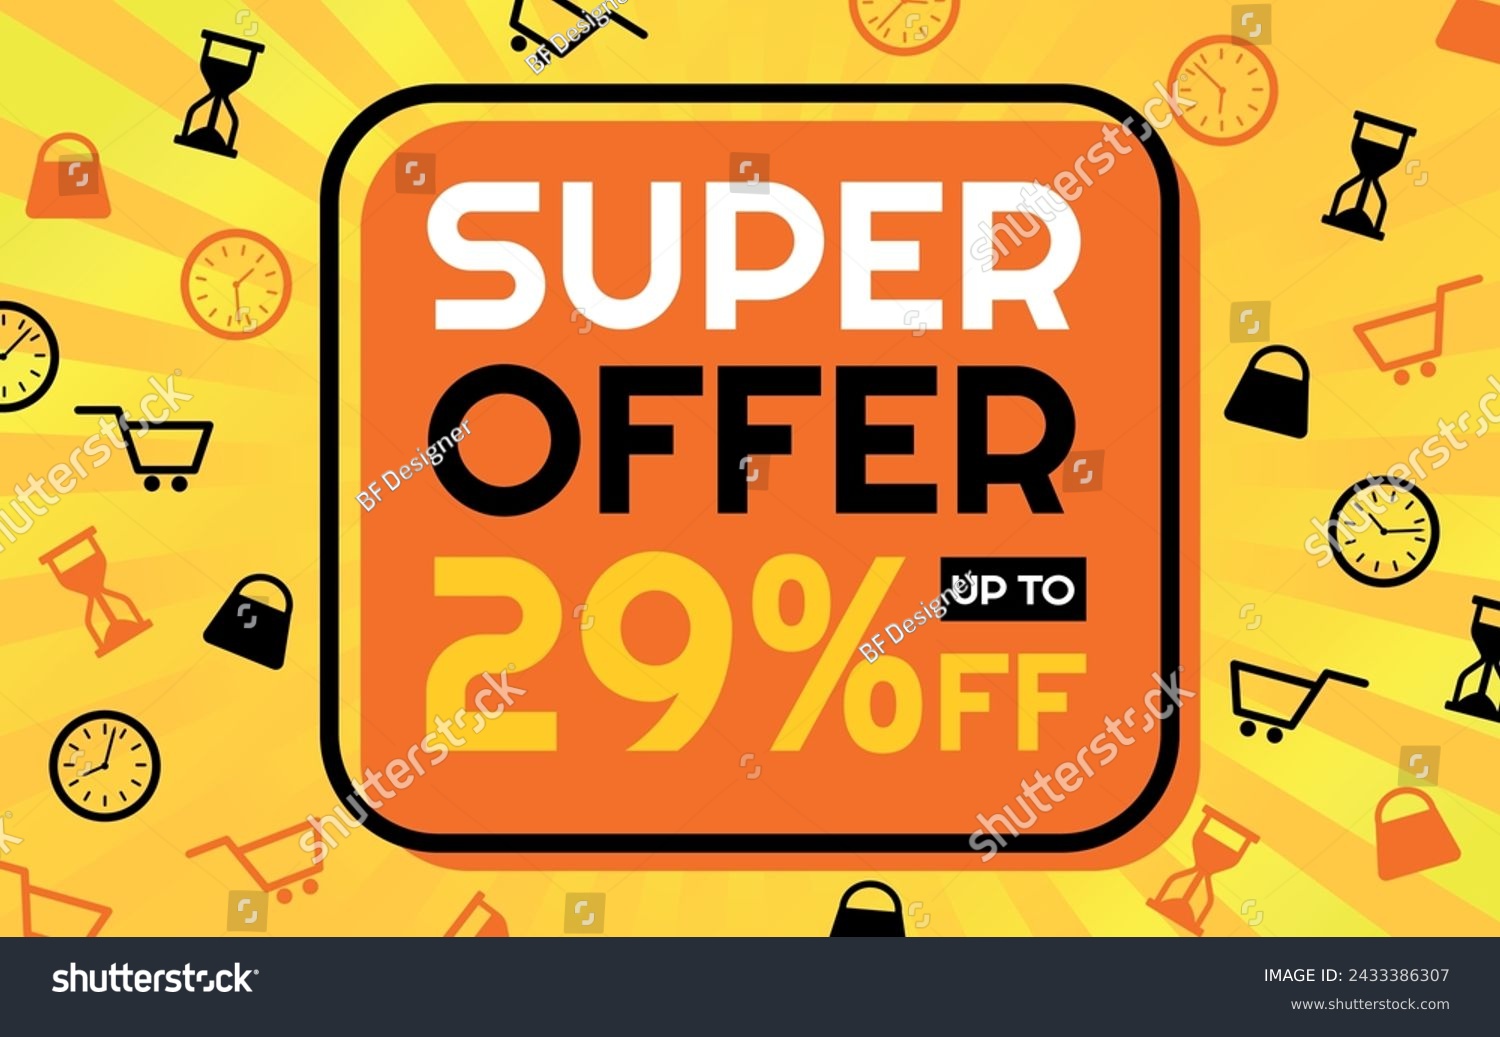 SVG of Super Offer 29% off Creative Advertising Banner, Orange, Yellow, Black and White, Sunburst Background, Shop and Limited Time Icons svg